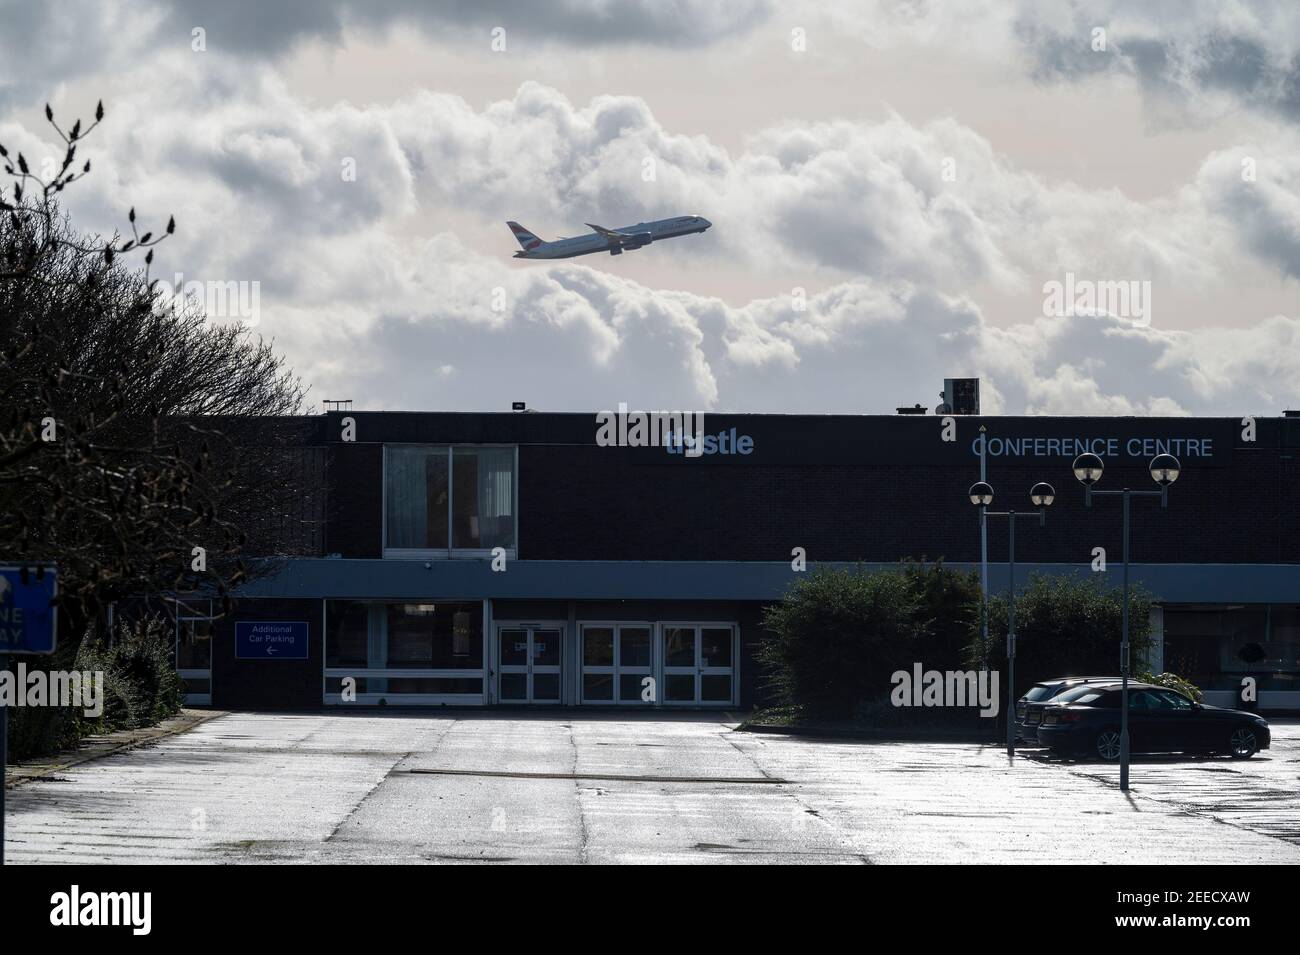 London, Britain. 15th Feb, 2021. An airplane flies over a hotel near Heathrow Airport in London, Britain, on Feb. 15, 2021. From Monday, all British and Irish citizens and British residents who arrive in England after being in the 'red list' of more than 30 high-risk countries now have to self-isolate in hotels. The 'red list' countries include South Africa, Portugal and South American nations. Credit: Ray Tang/Xinhua/Alamy Live News Stock Photo